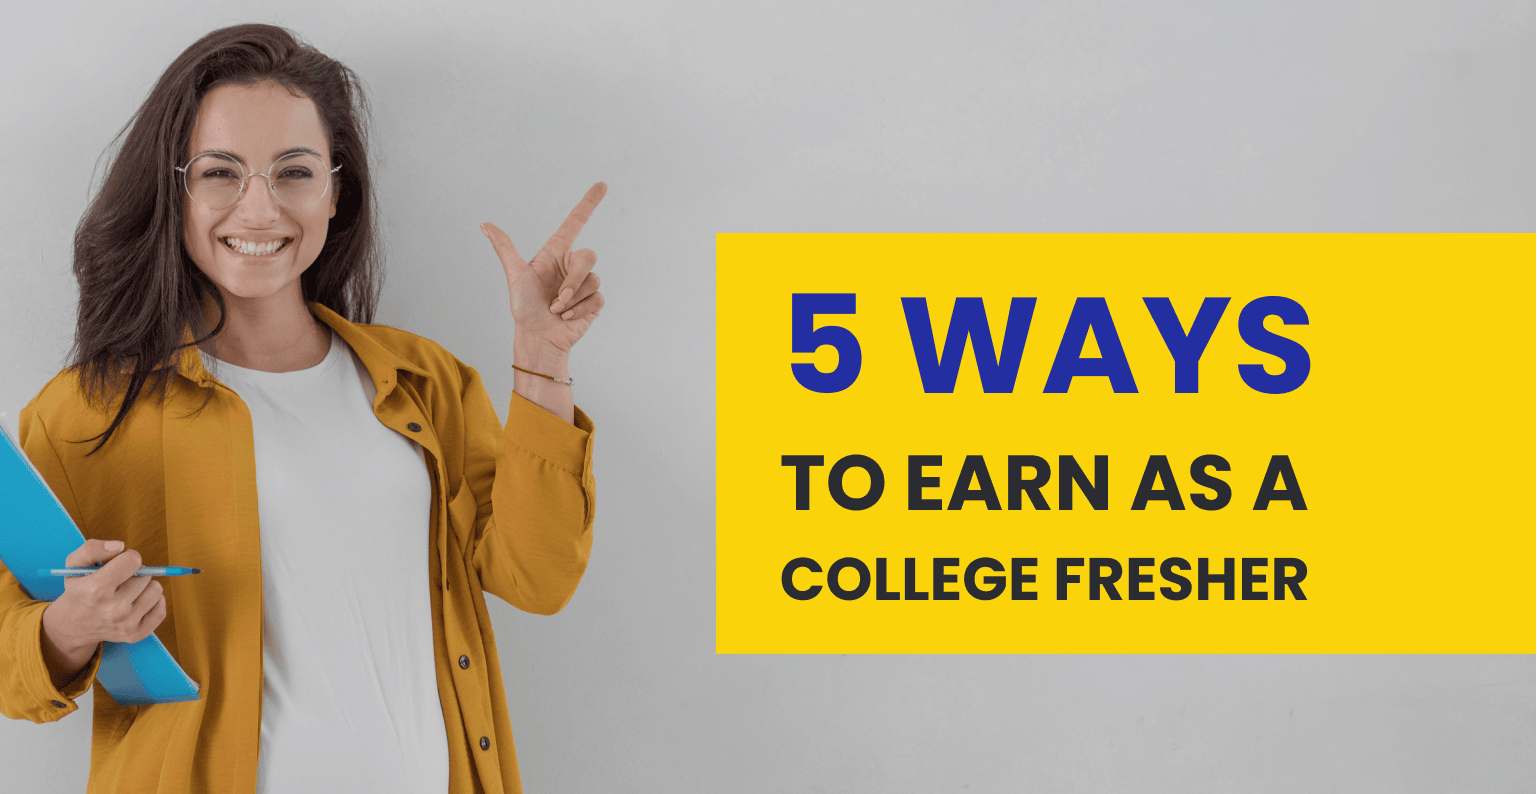 5-ways-to-earn-as-a-college-fresher-resized